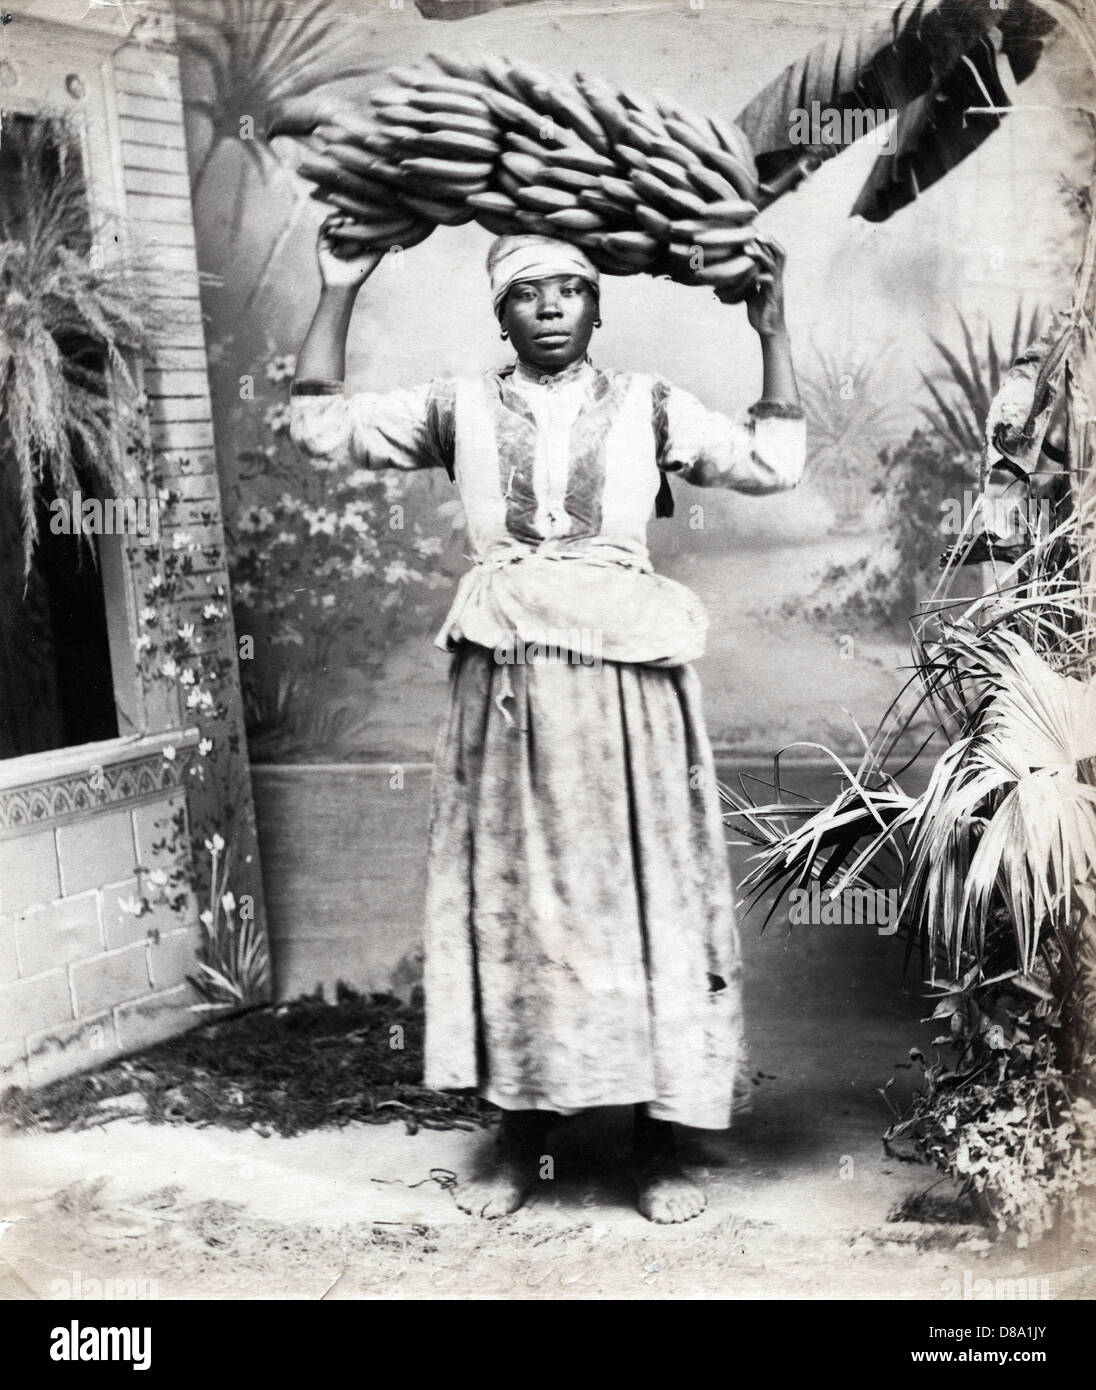 Banana Carrier, Jamaica, by J.W. Cleary Stock Photo